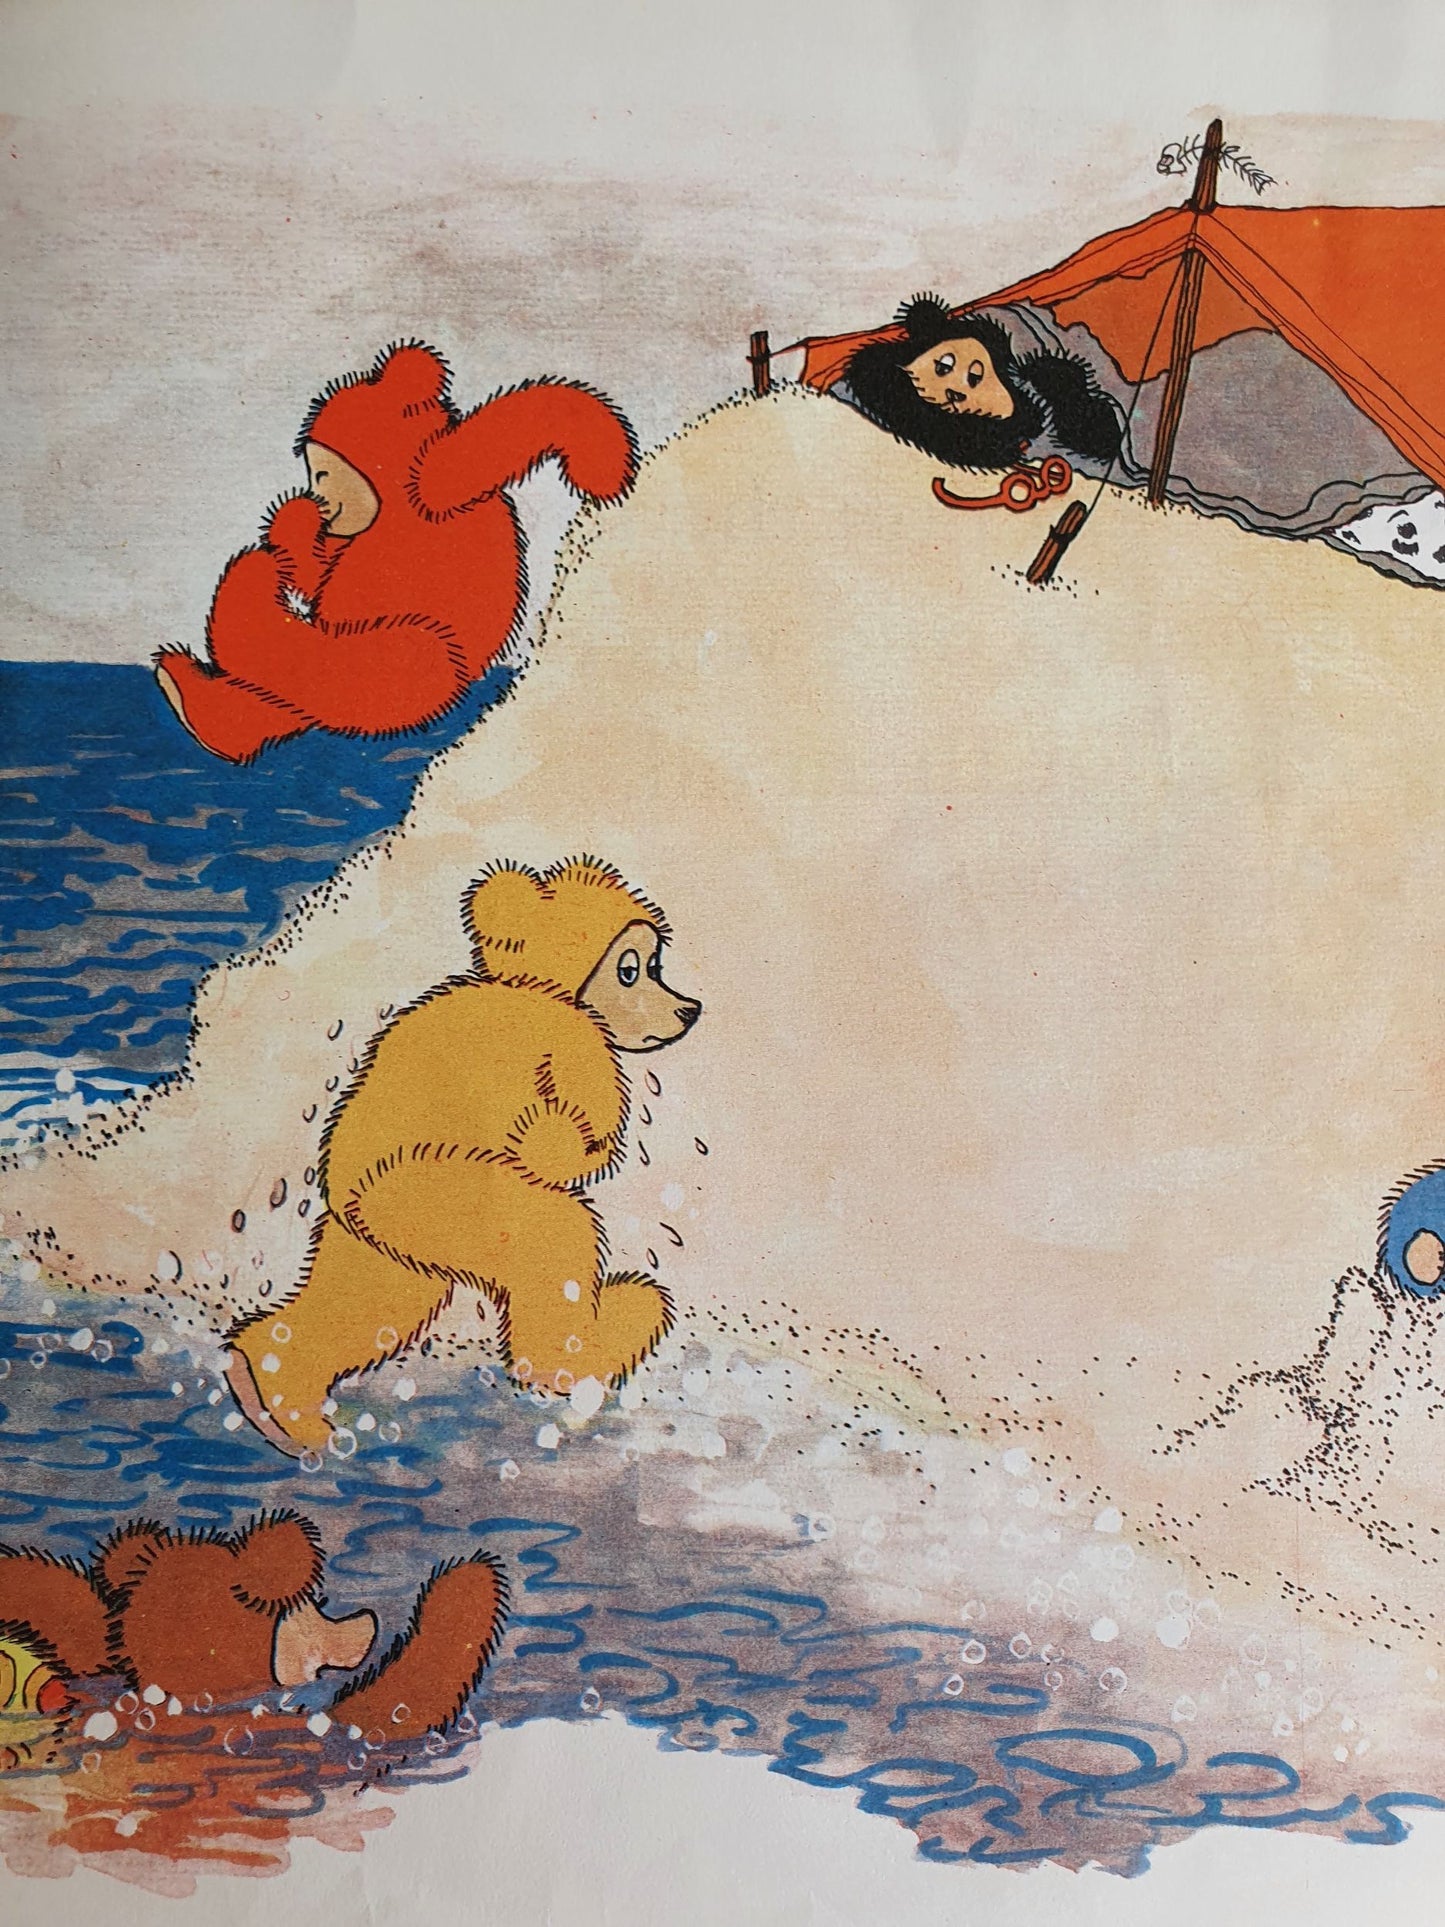 The Bears who went to the seaside Well Read Not Applicable  (4603217215543)